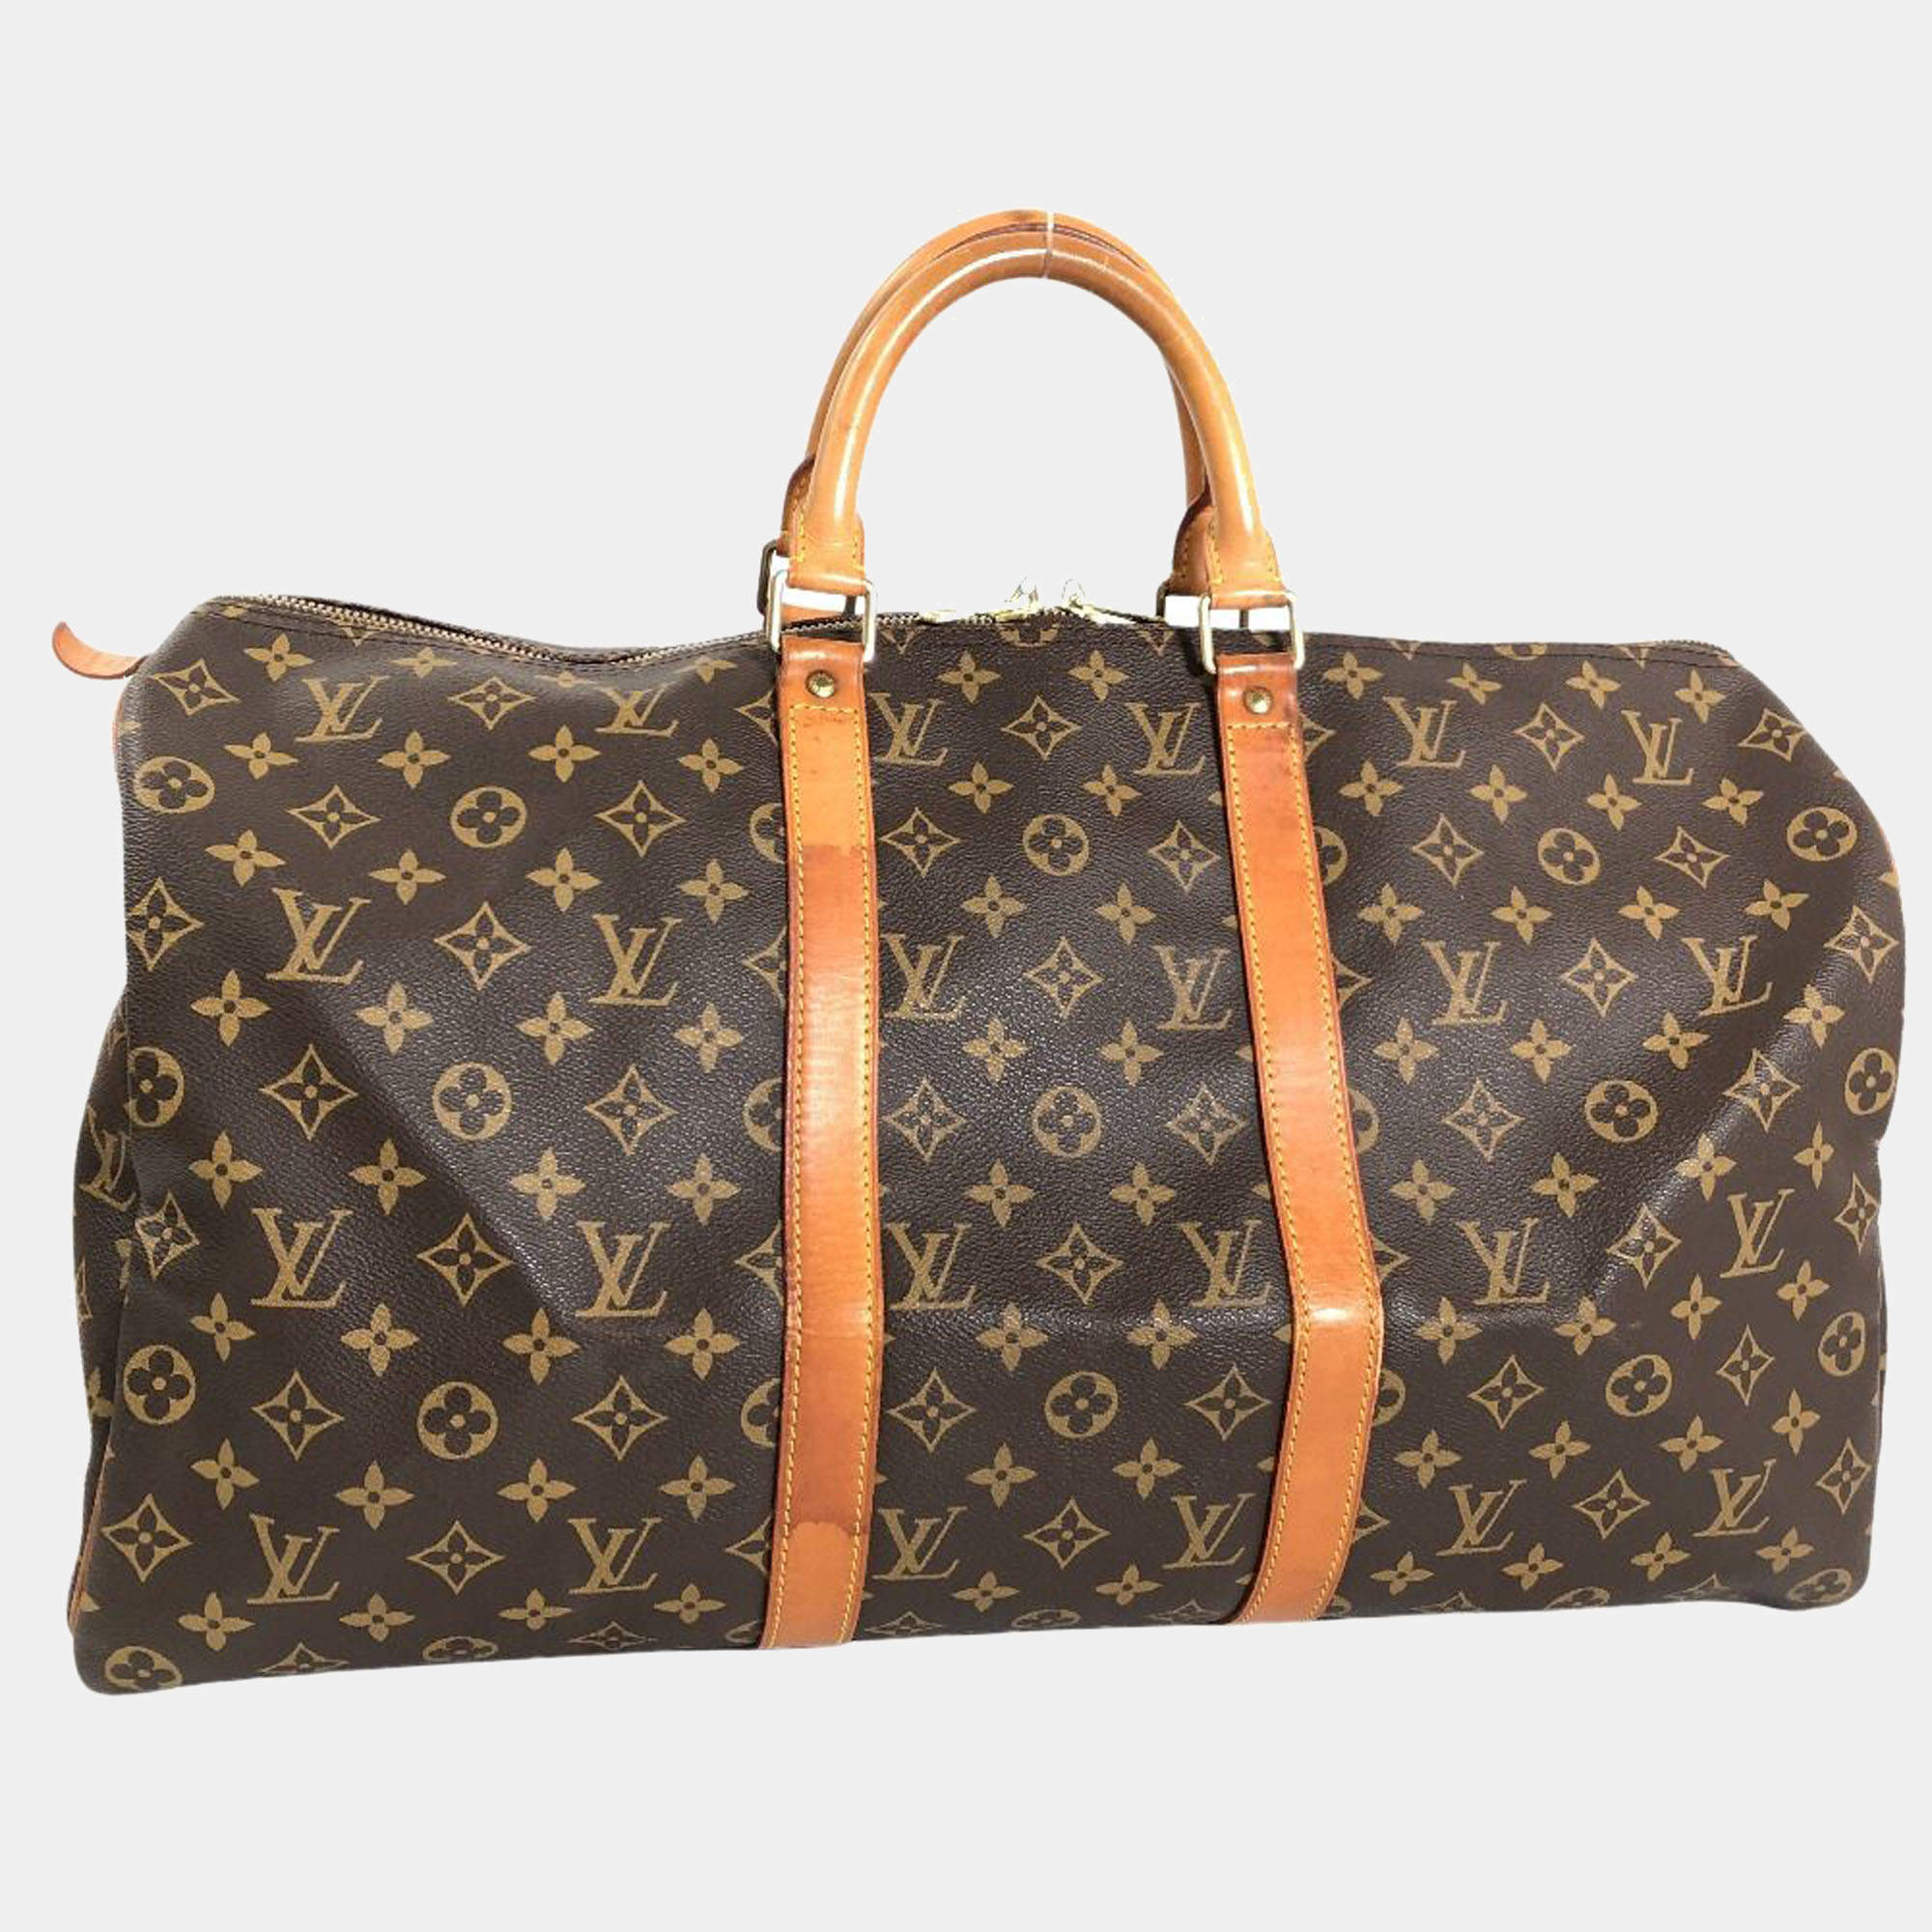 Louis Vuitton Keepall 50 Travel Duffle Bag, in brown in United States